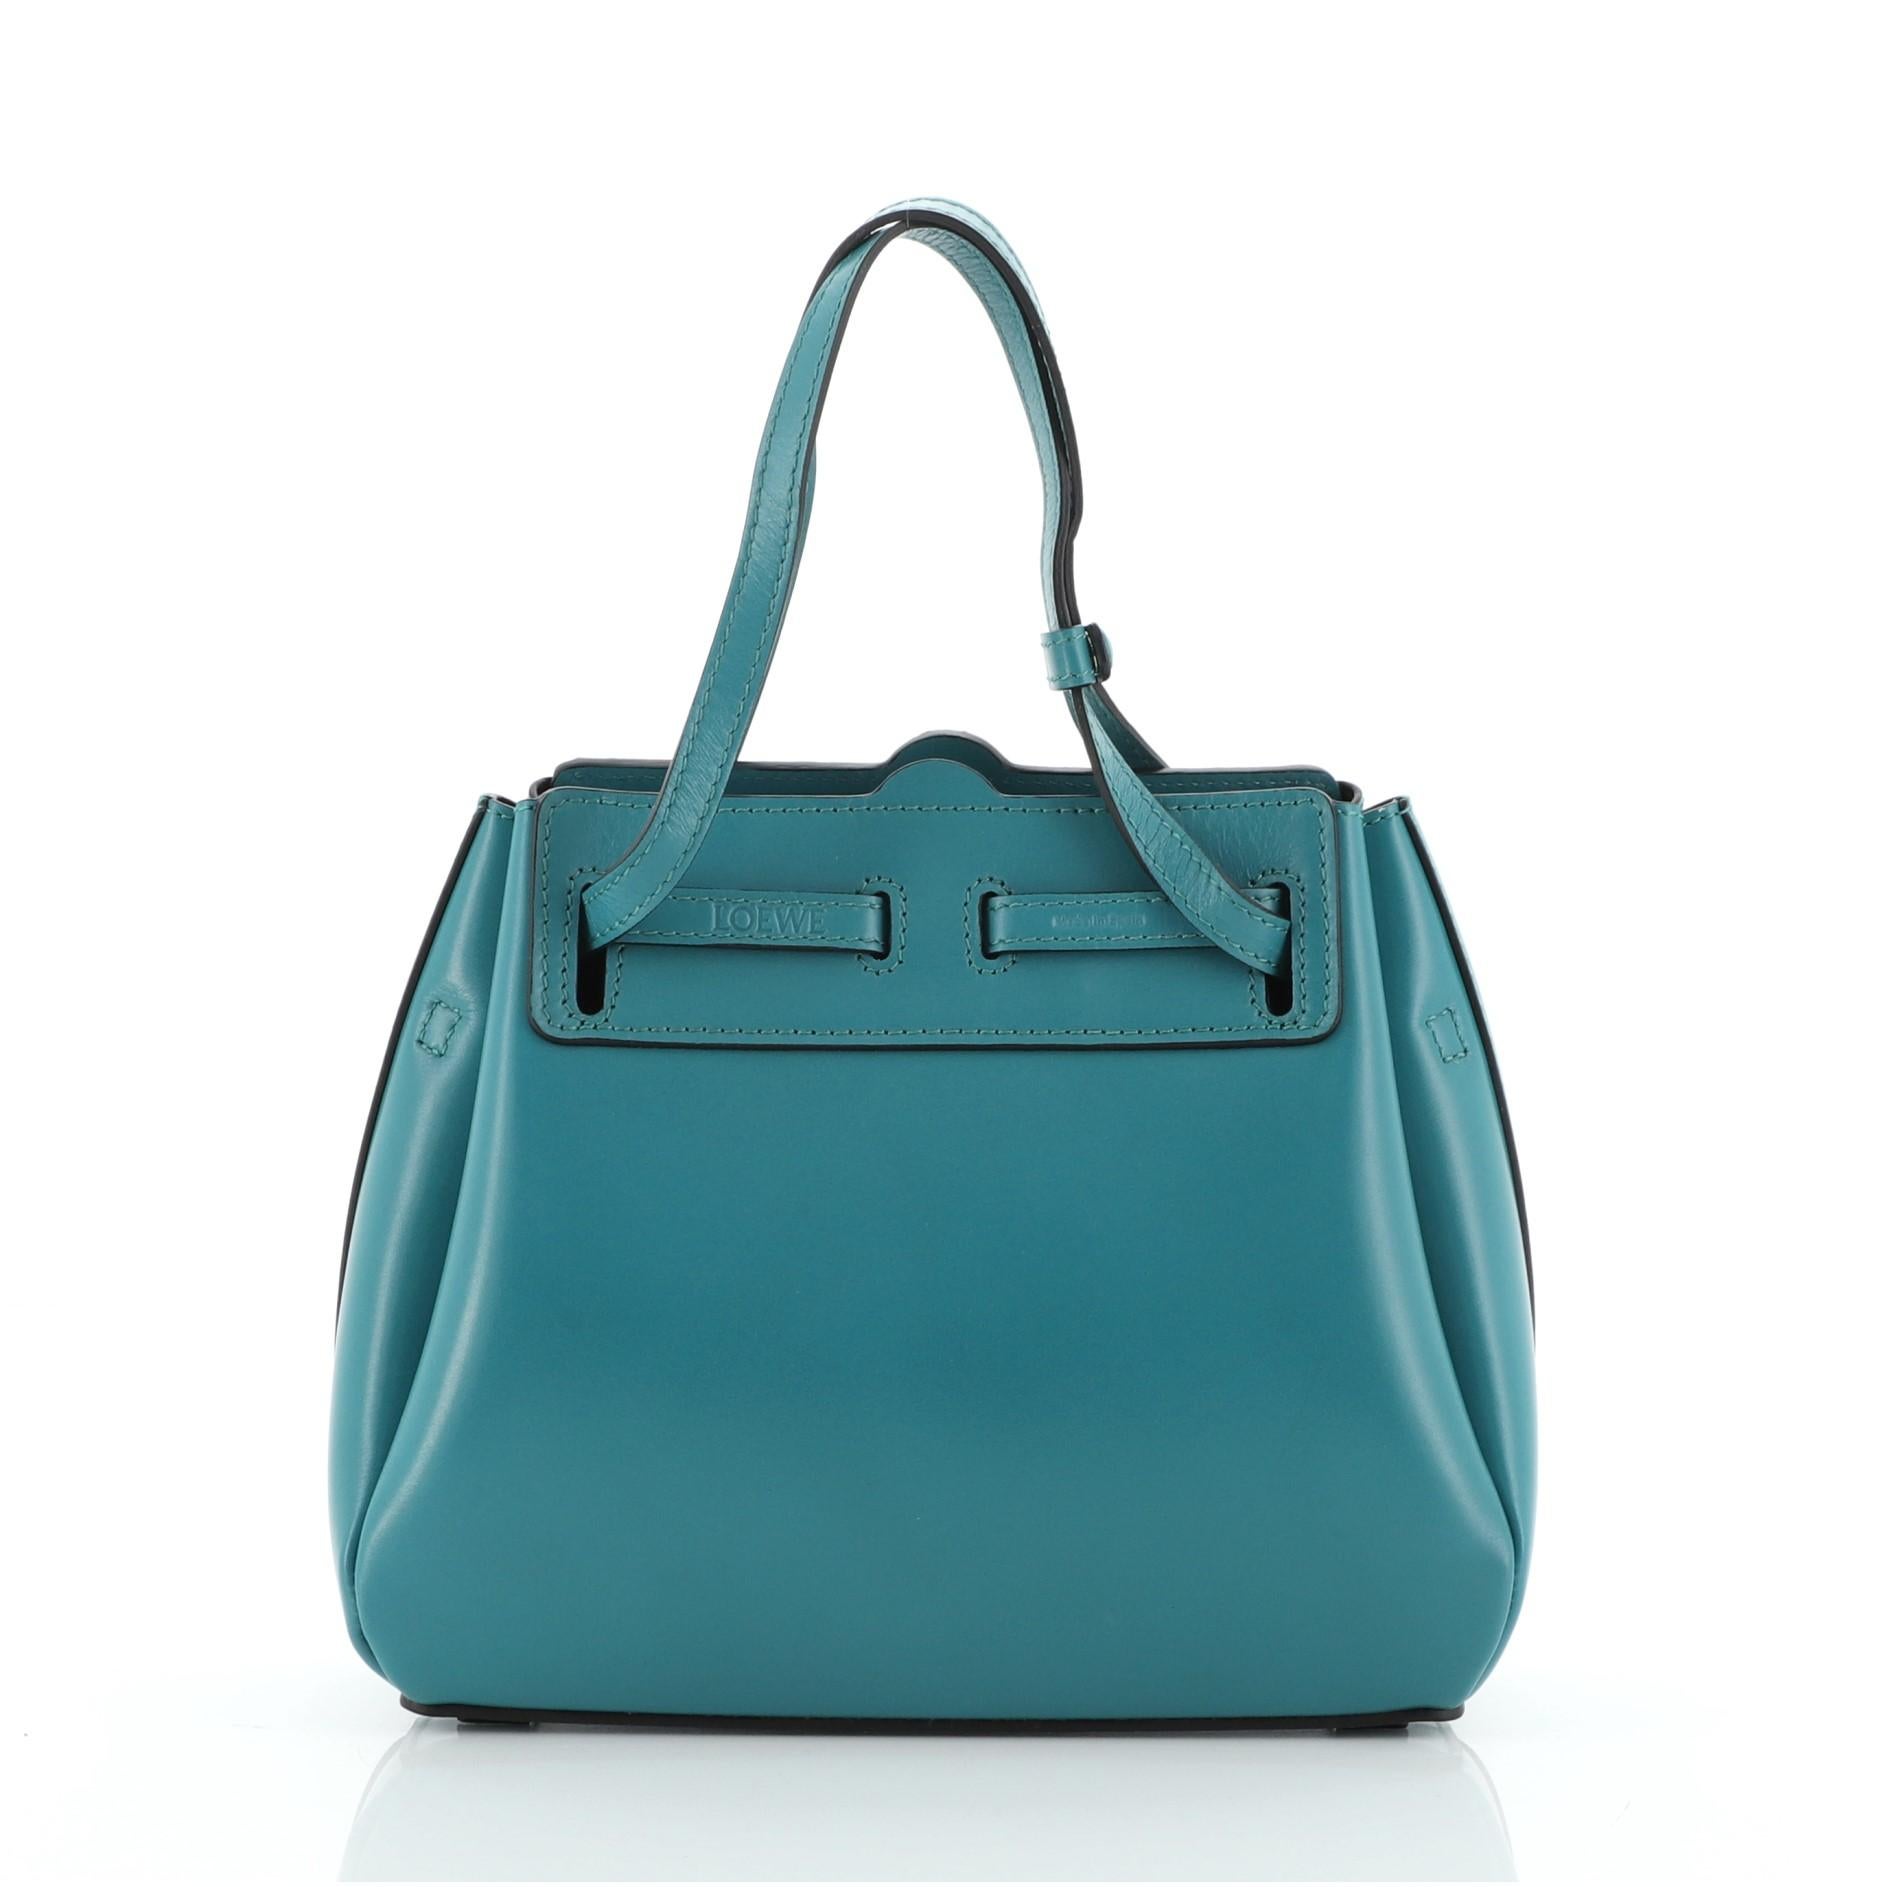 Loewe Lazo Bag Leather Mini
Green Leather

Condition Details: Scuffs and marks on exterior, small indentations on interior base, scratches on hardware.

49819MSC

Height 7.5